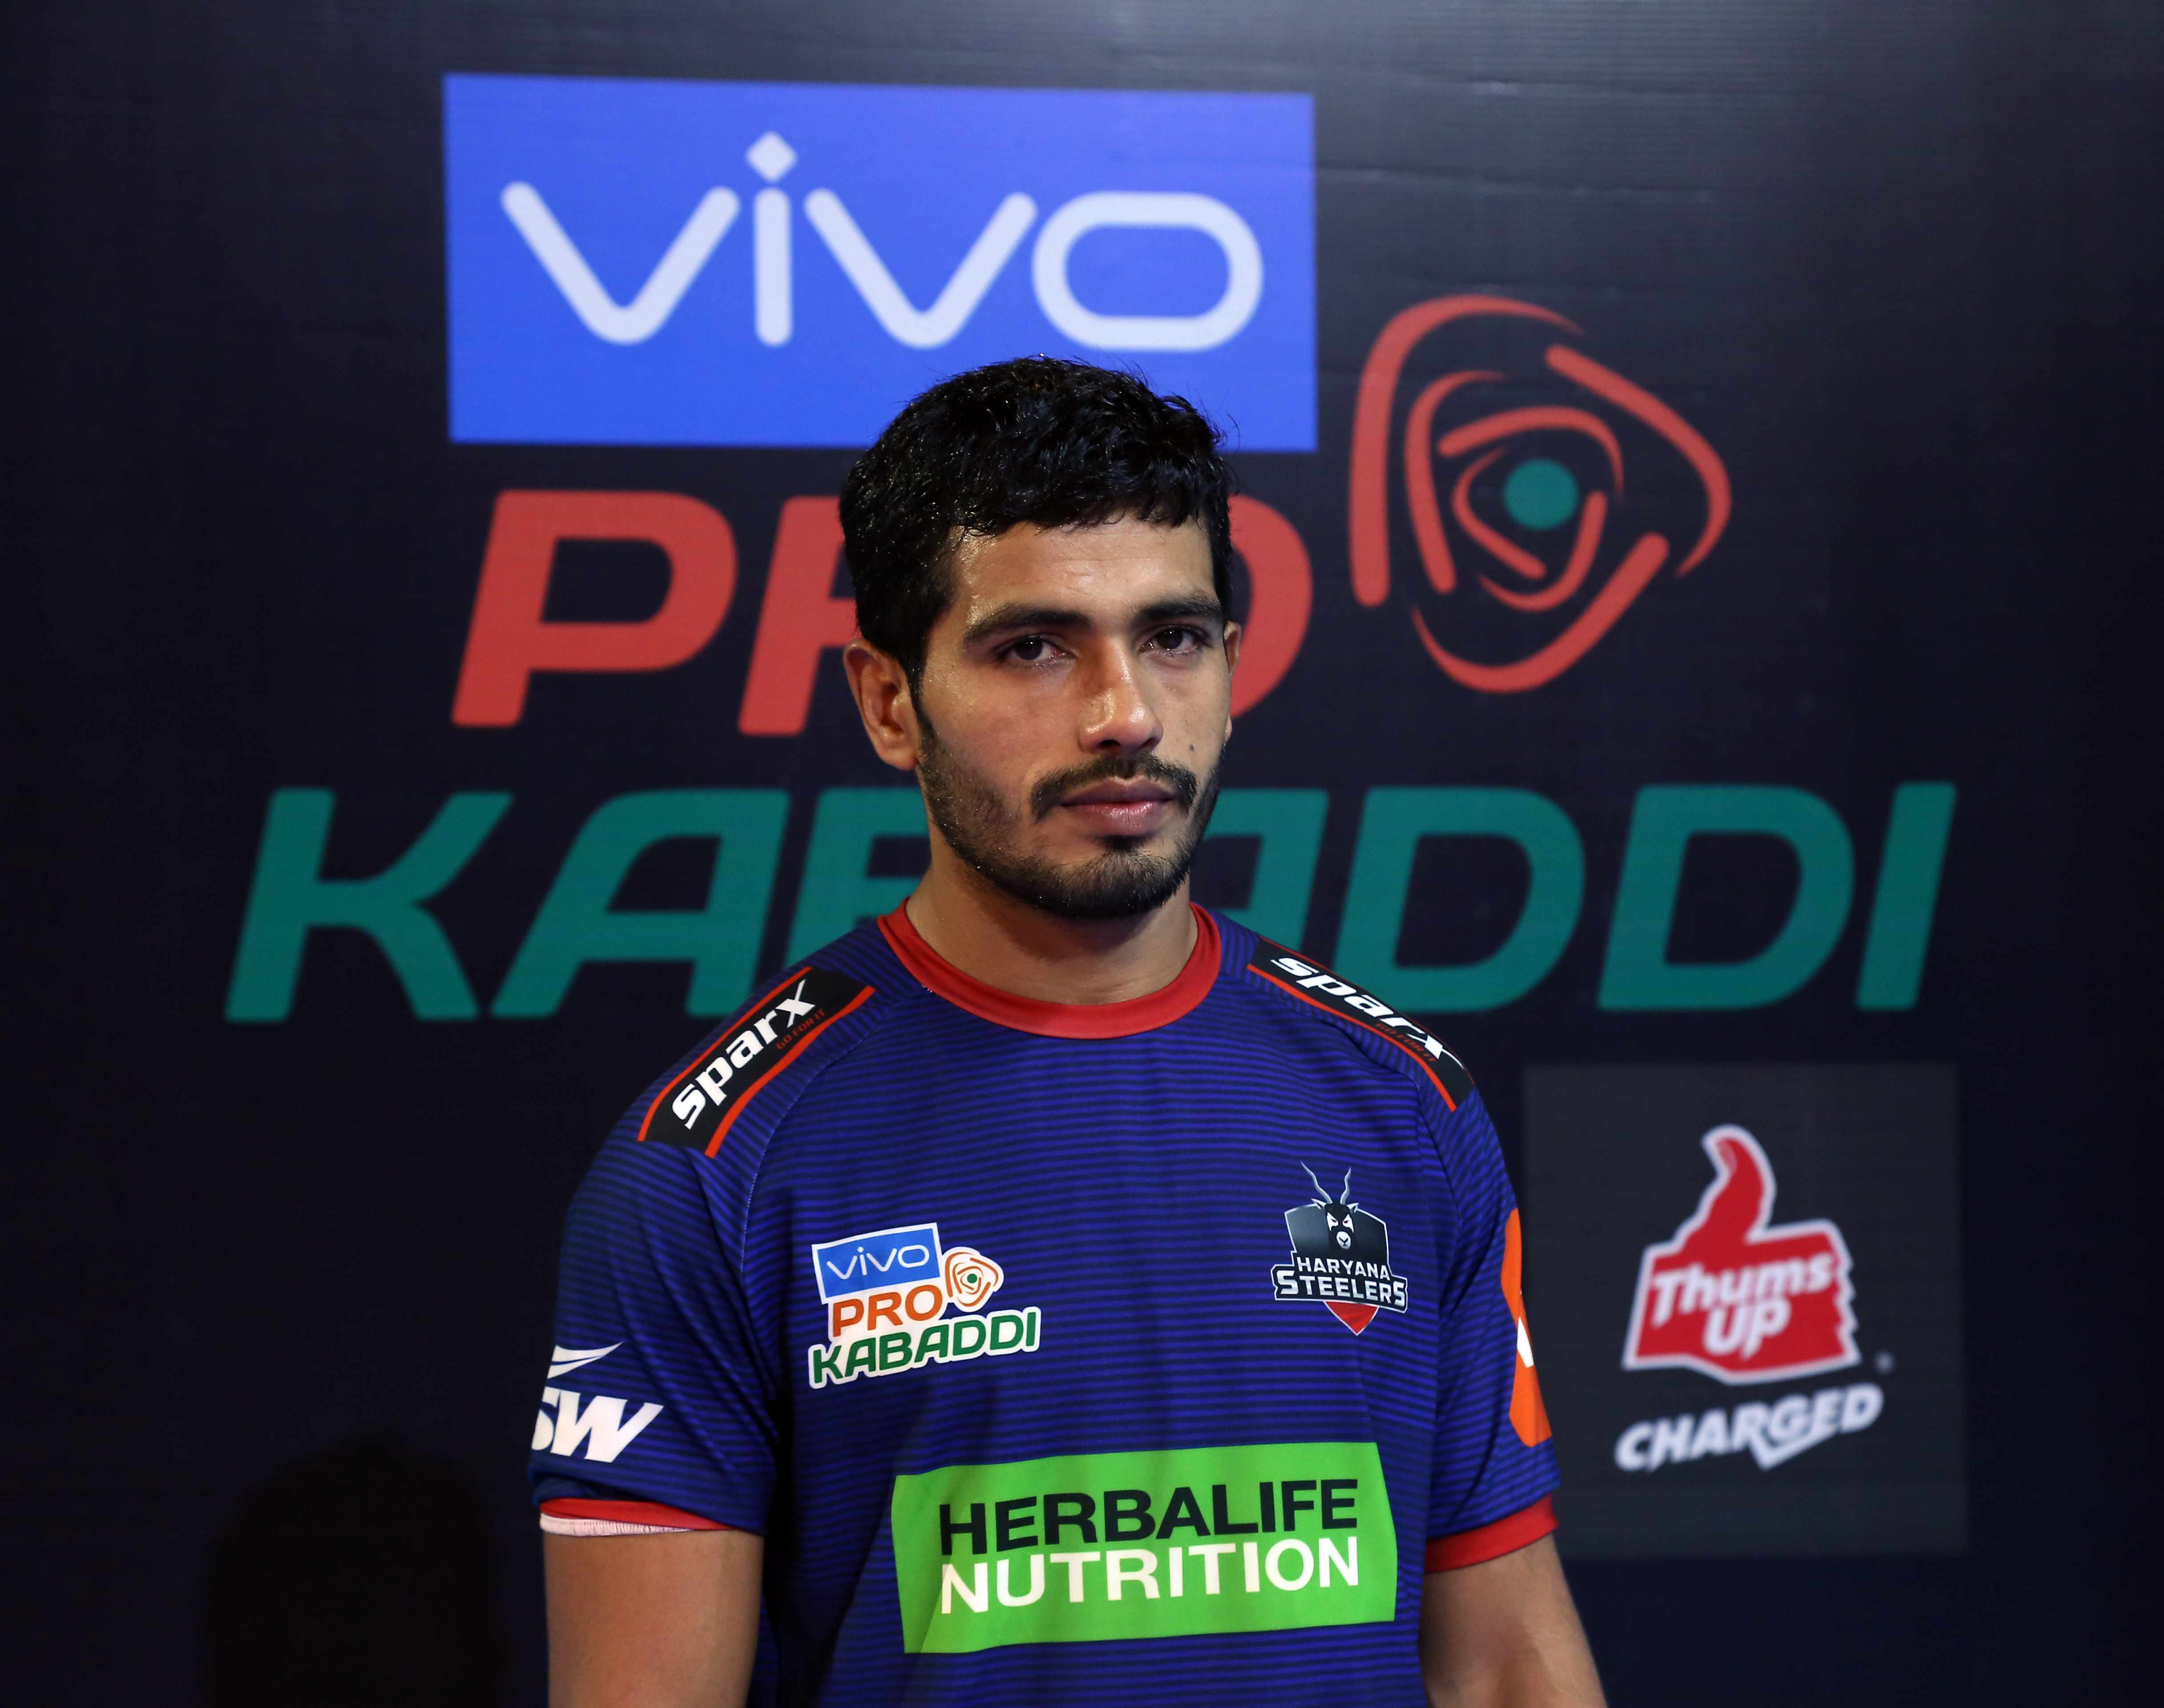 PKL 2018 | We were fearless in our approach, says Vikash Khandola